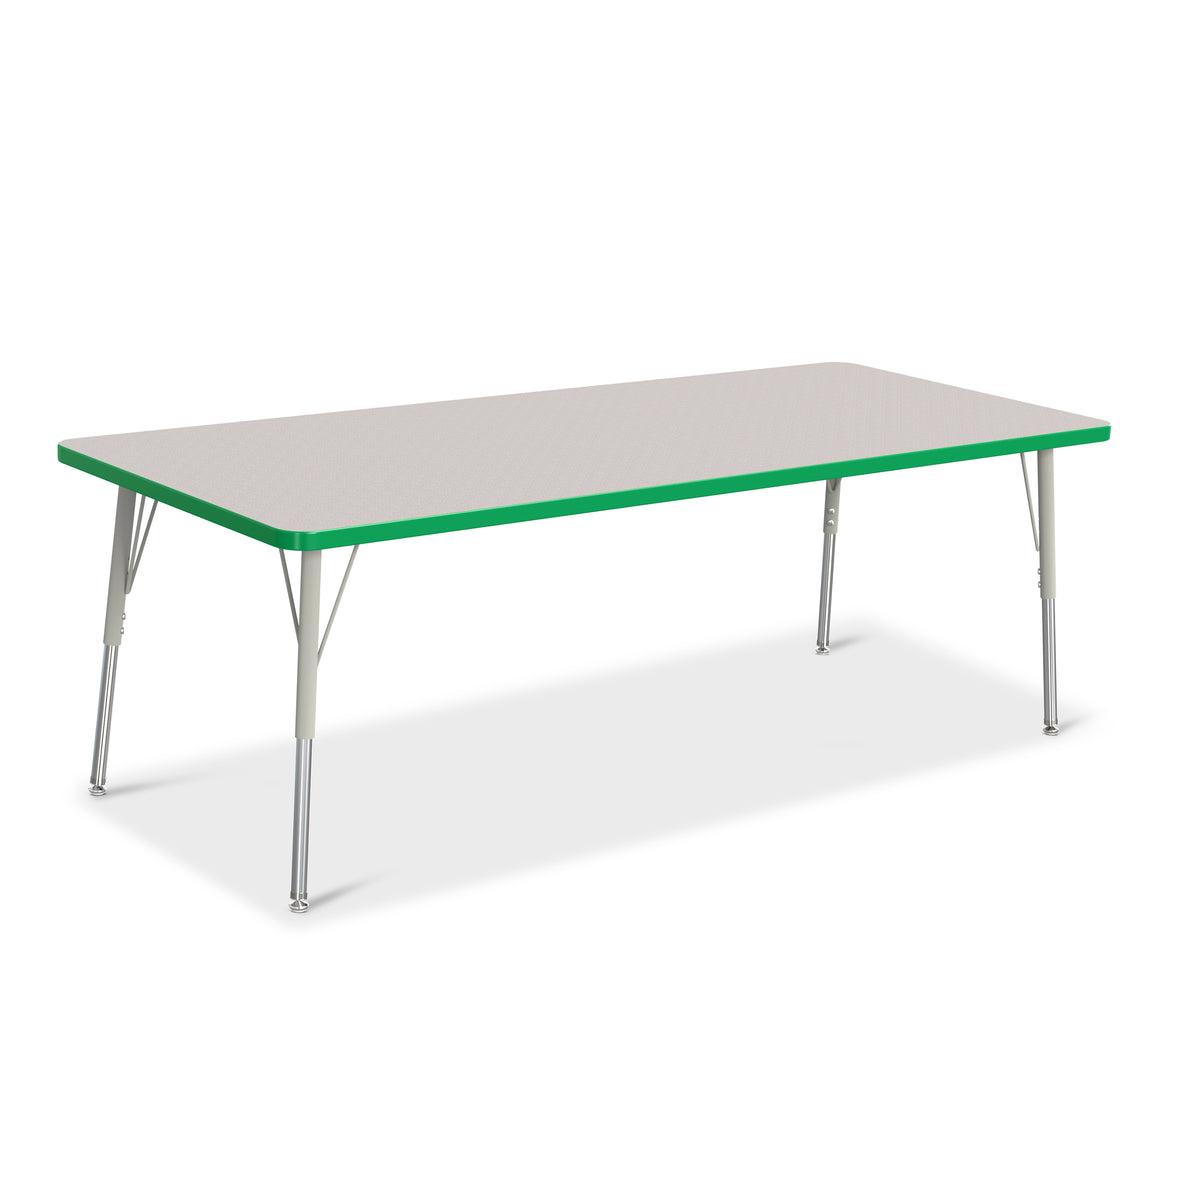 6413JCA119, Berries Rectangle Activity Table - 30" X 72", A-height - Freckled Gray/Green/Gray